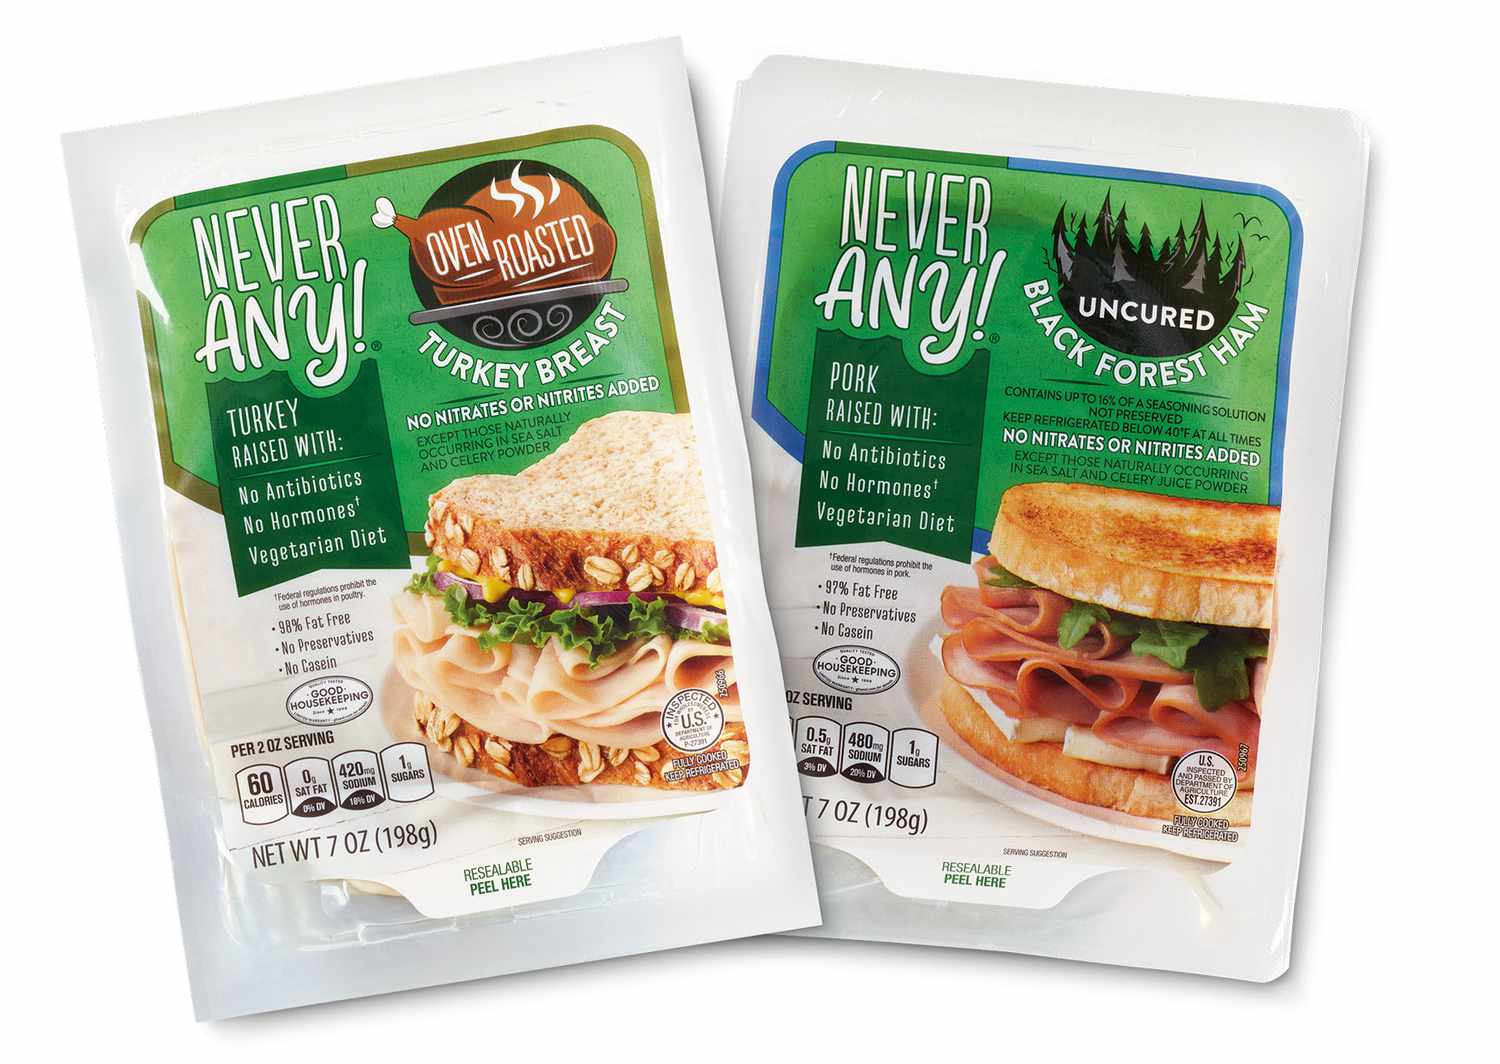 Never Any! brand packaged oven roasted turkey breast and uncured black forest ham